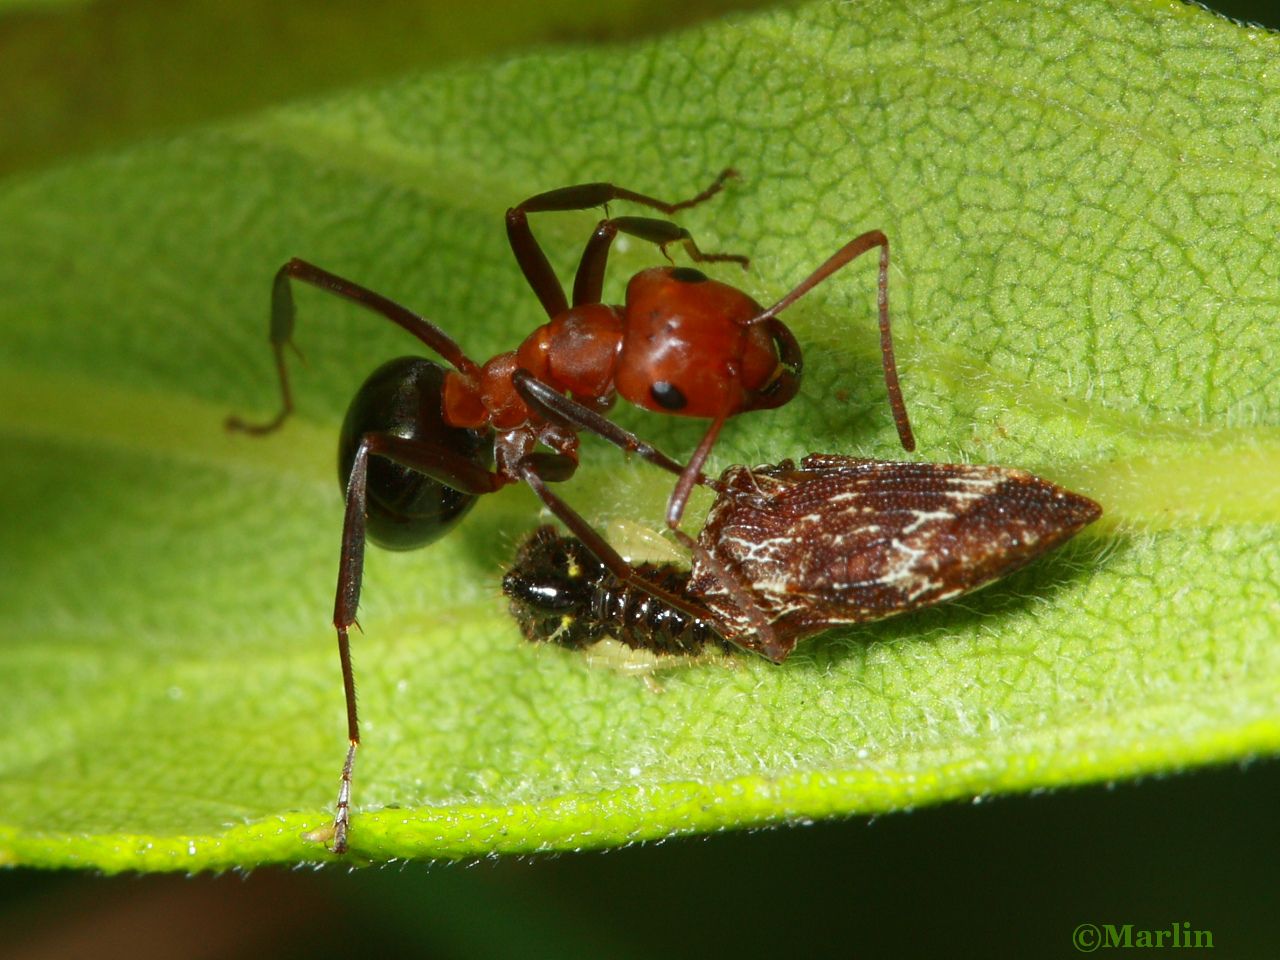 Allegheny mound ant and hoppers (adult & nymph)